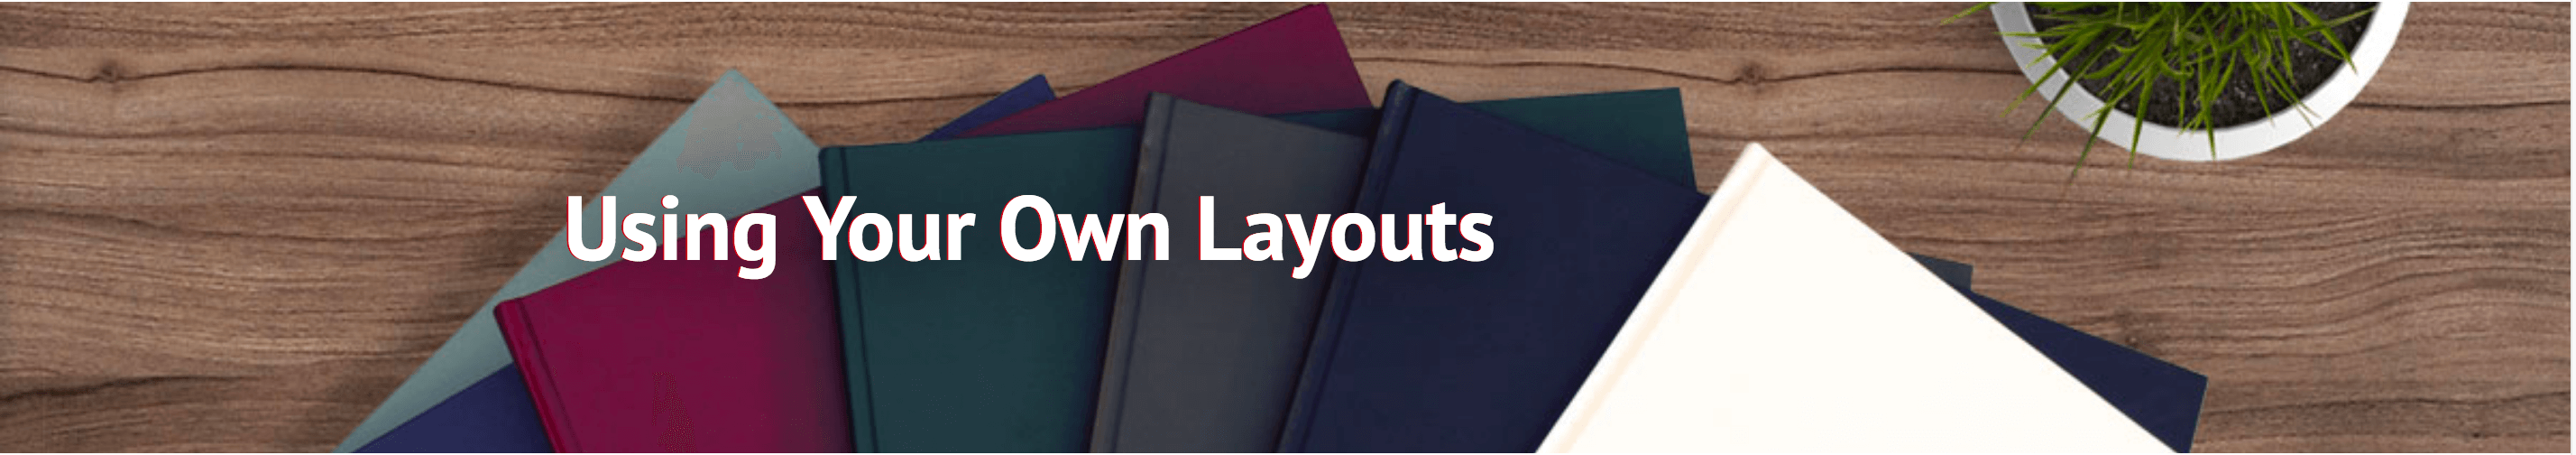 Using your own layouts